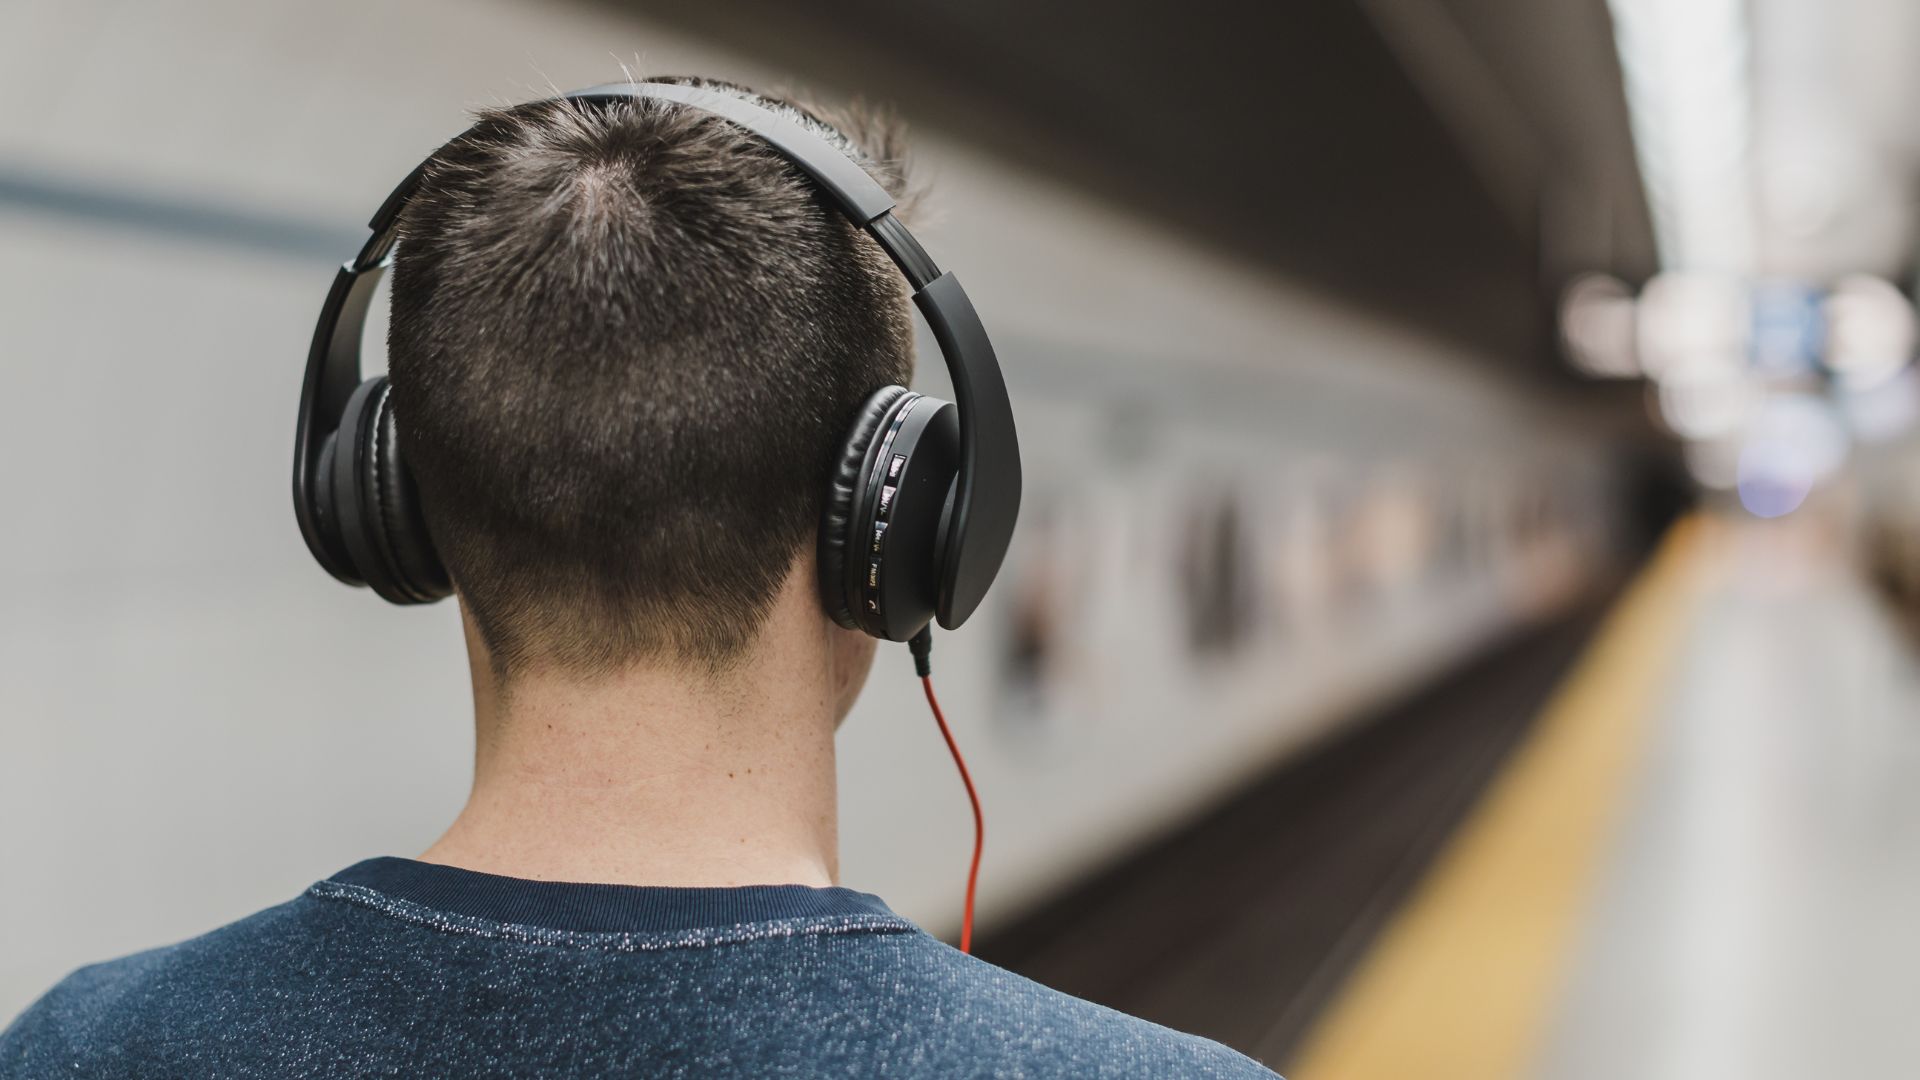 Loud music in headphones can damage young people's hearing and create tinnitus